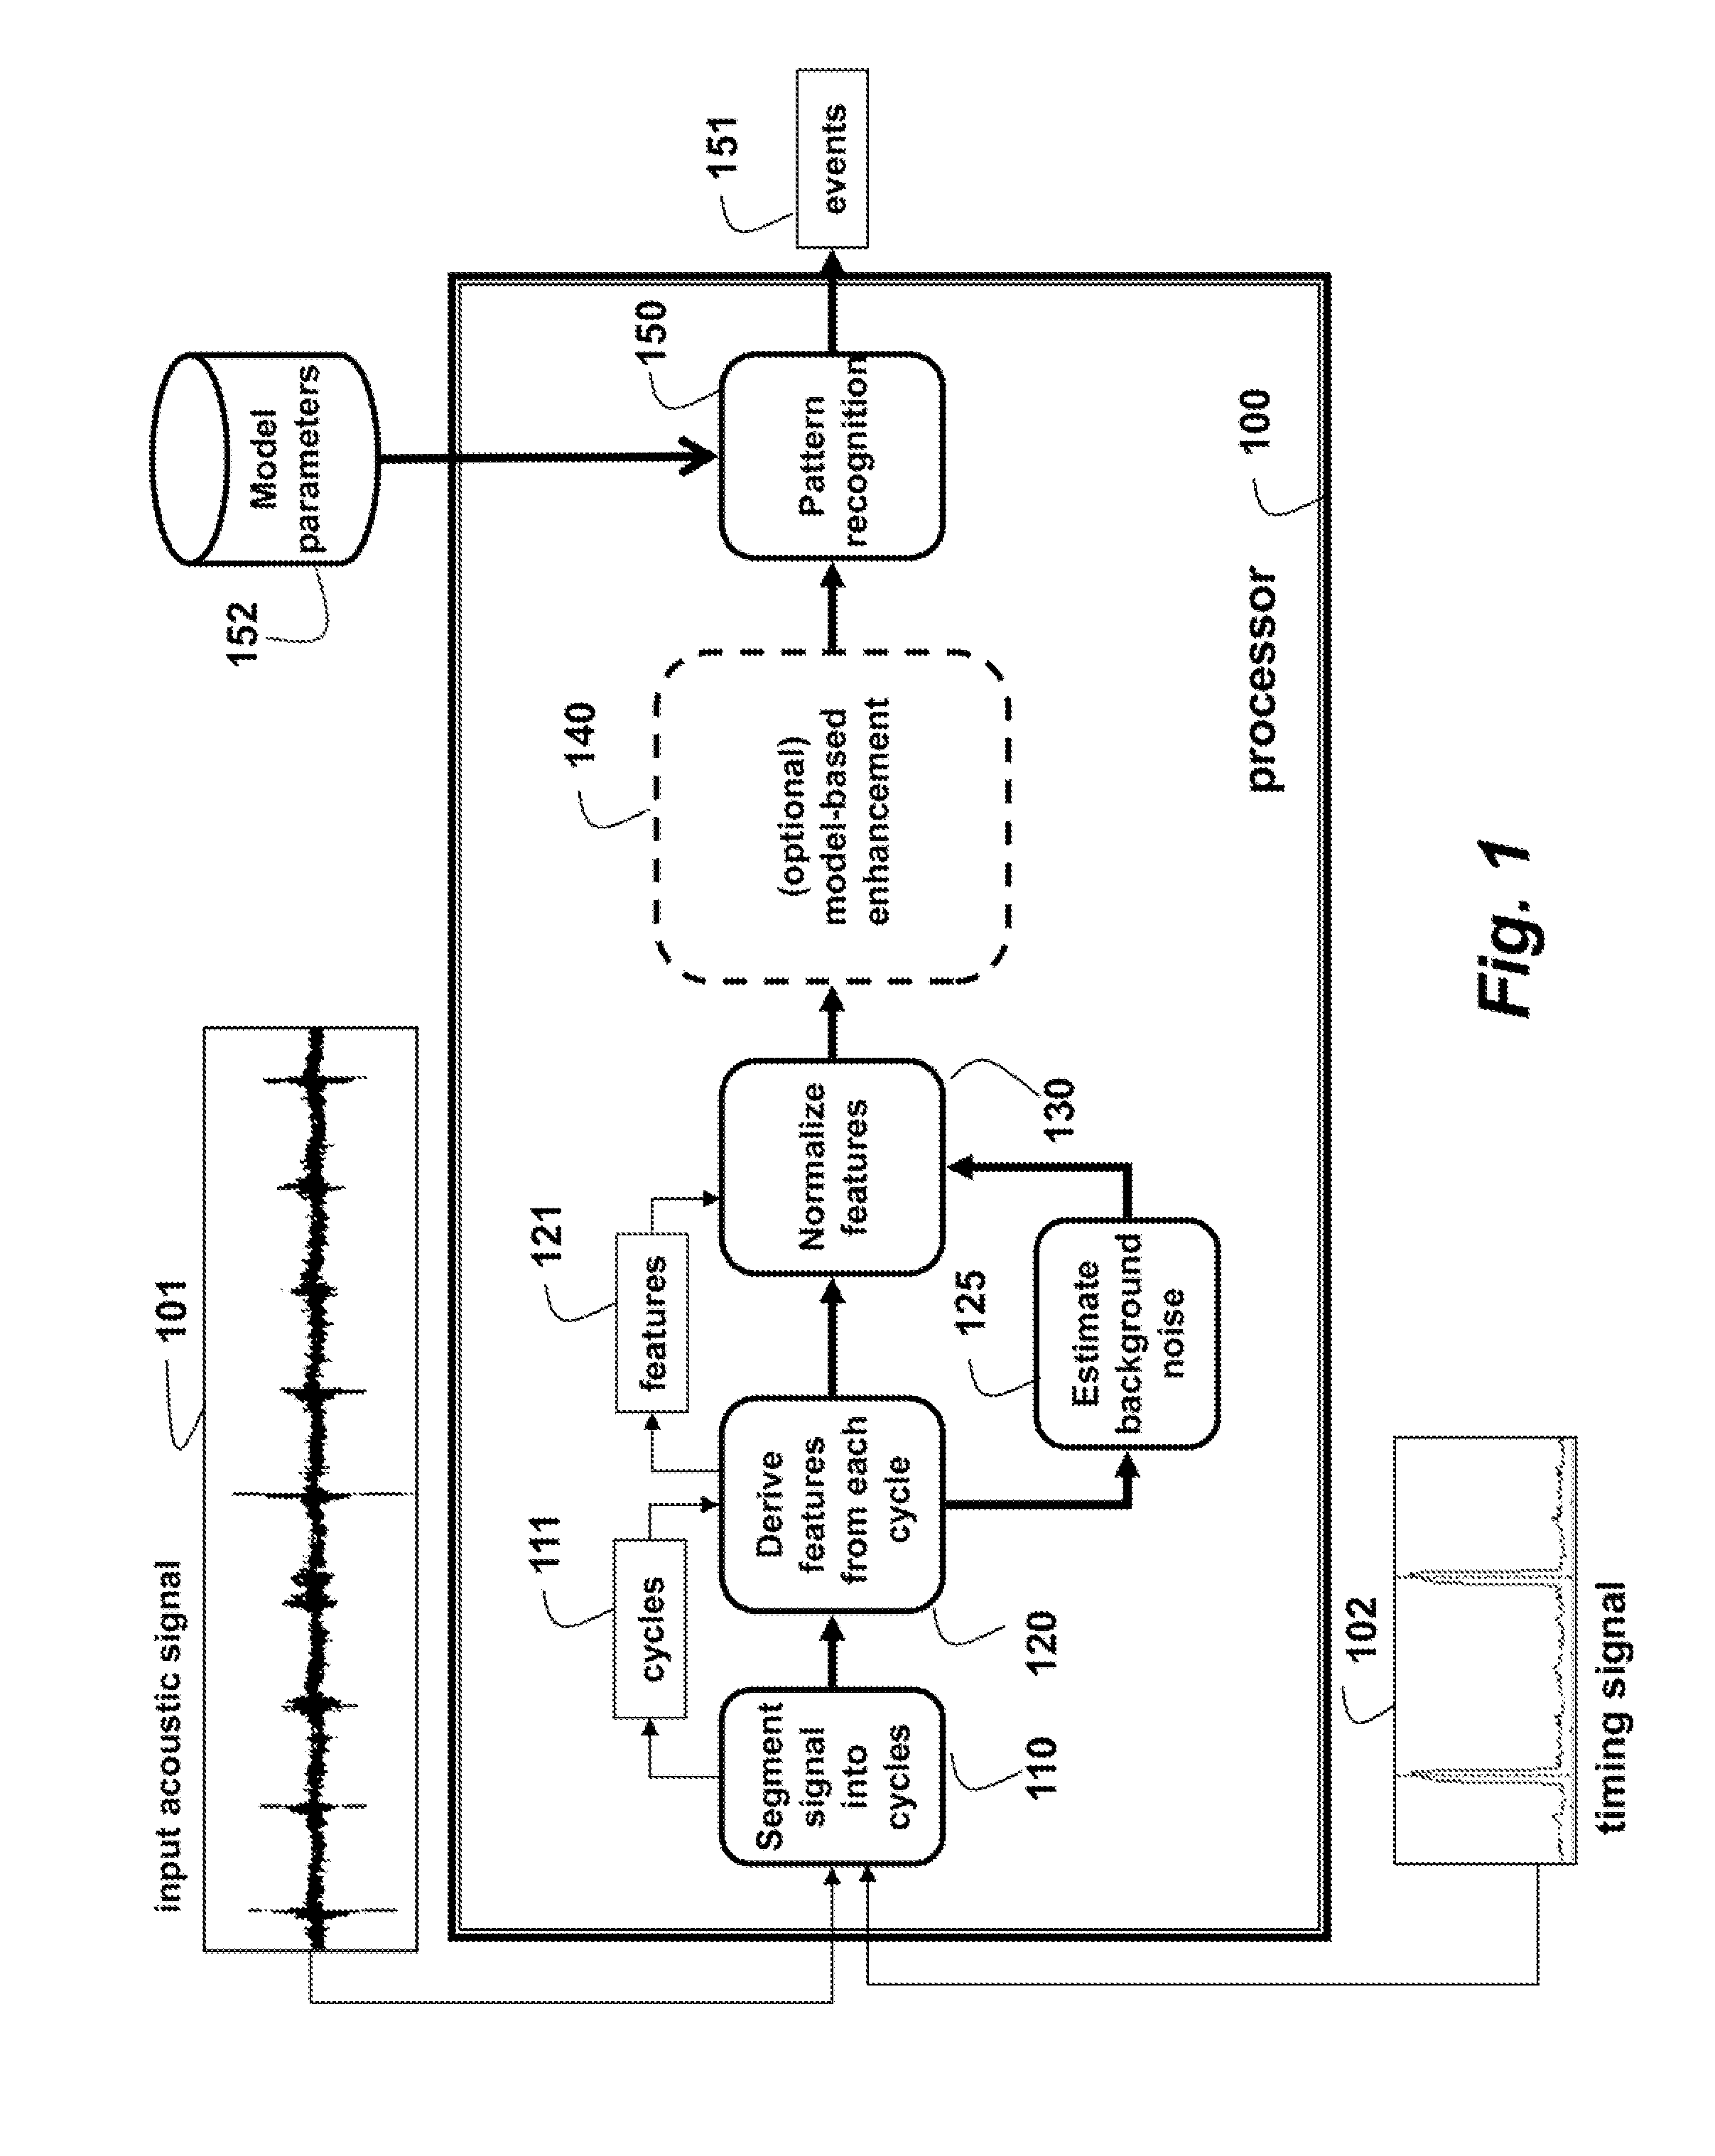 Method and System for Detecting Events in an Acoustic Signal Subject to Cyclo-Stationary Noise